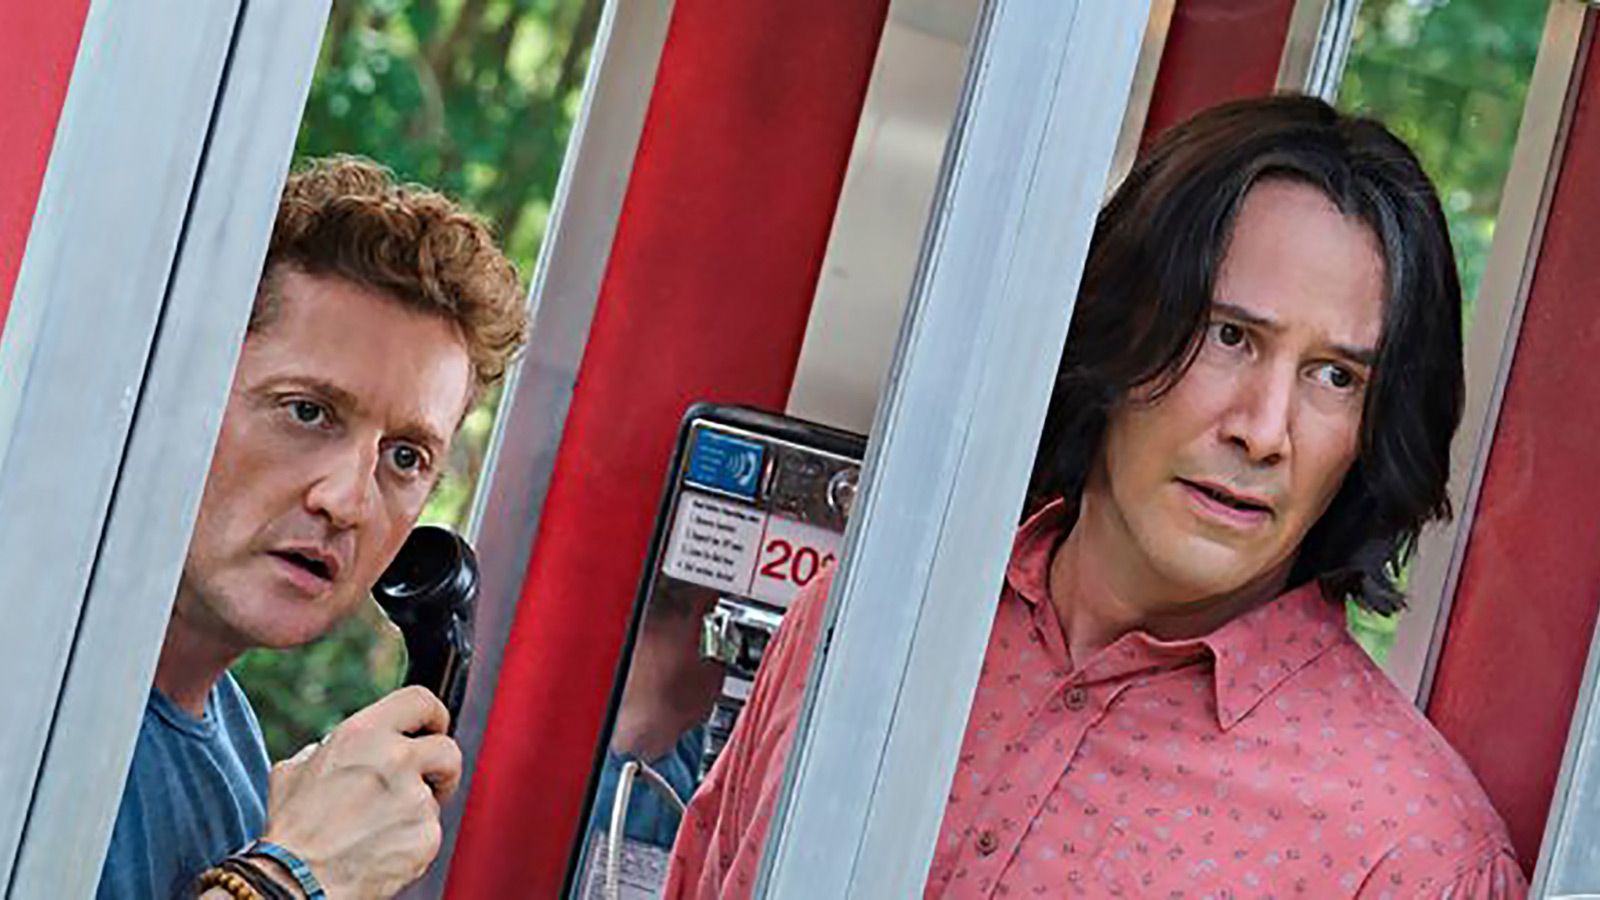 Bill & Ted Face the Music' Soundtrack Features New Mastodon and Lamb of God Songs